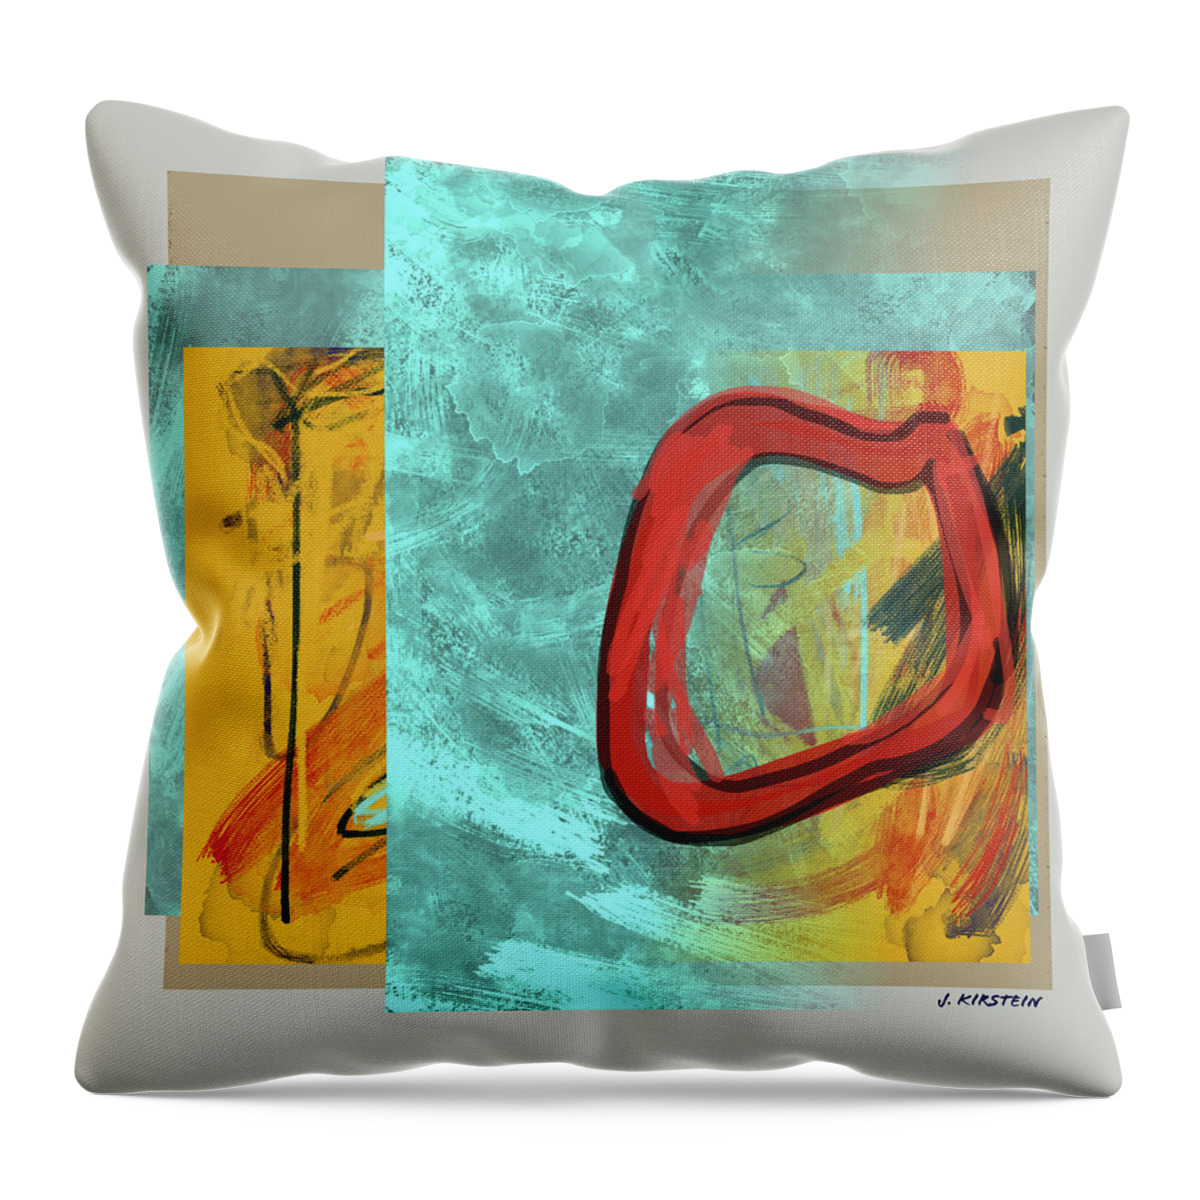 Abstract Throw Pillow featuring the digital art Becoming Visible by Janis Kirstein